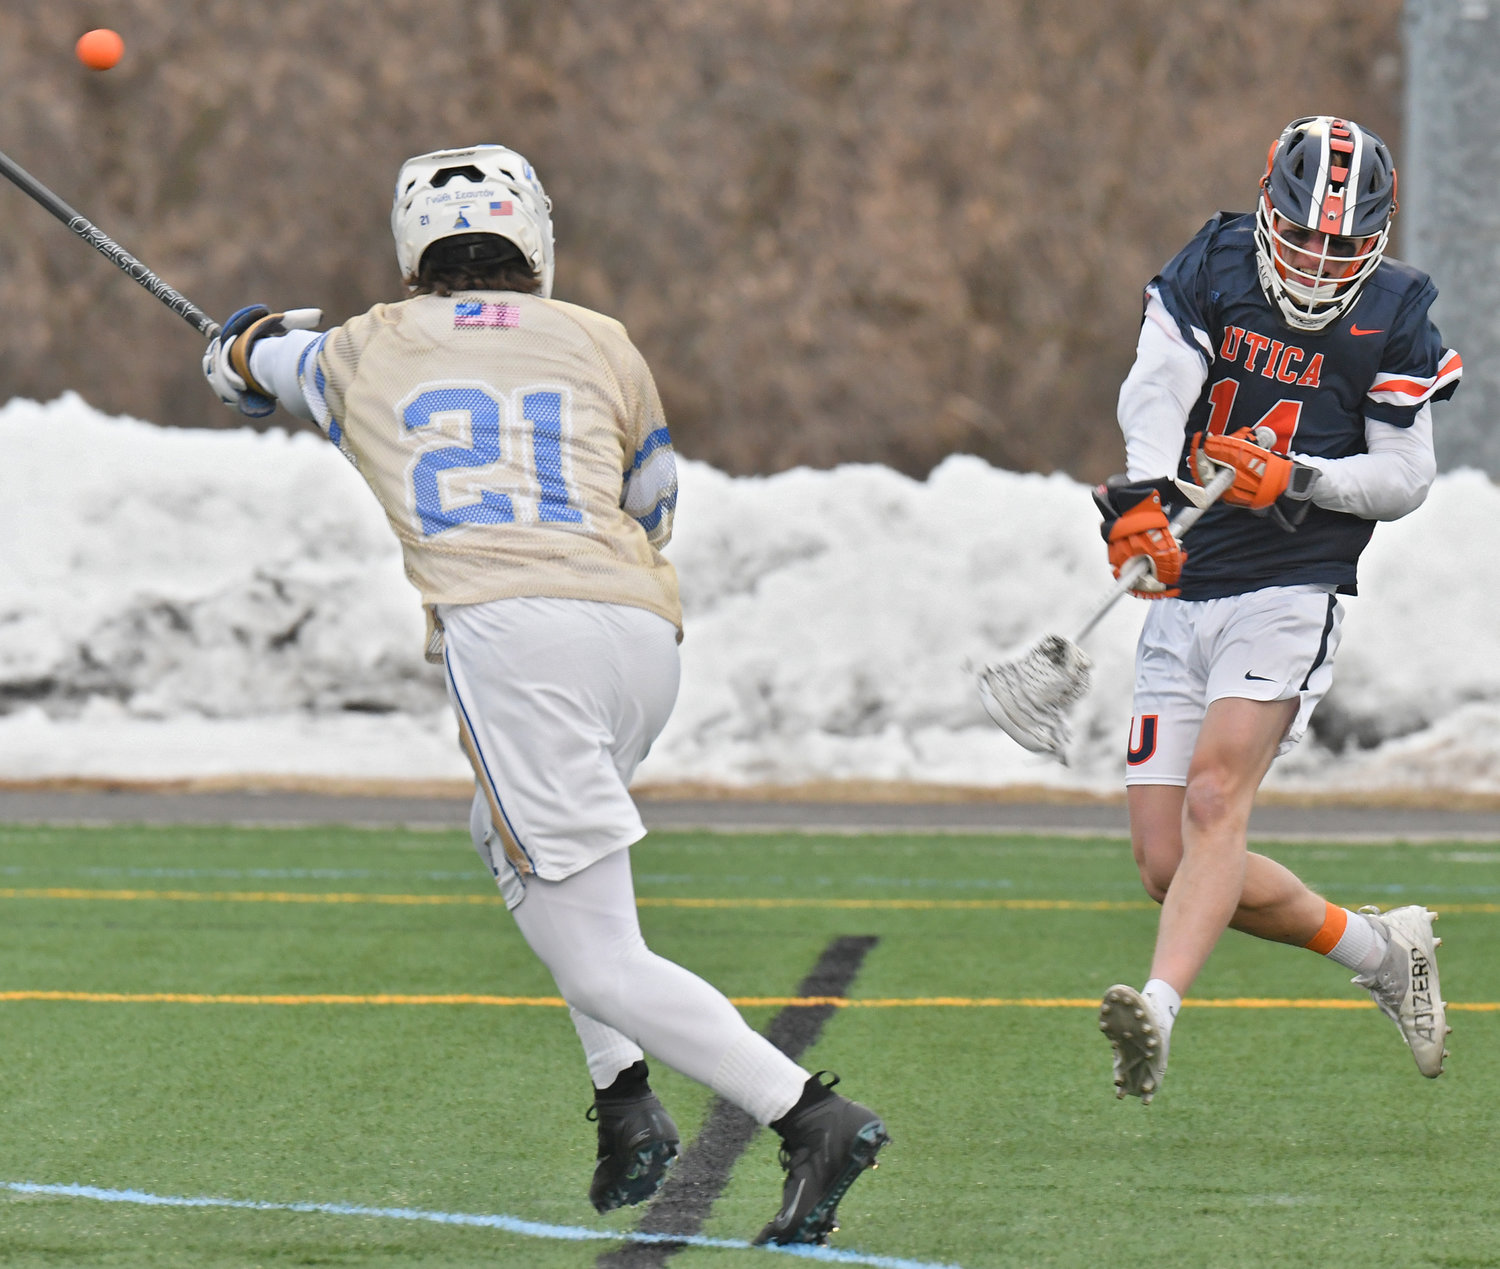 SHOT ATTEMPT — Utica University's Luke Rinaudo-Concessi whips a shot on goal with Hamilton College's Cole Johnson defends during Tuesday's men's lacrosse game at Hamilton College's Withiam Field in Clinton.